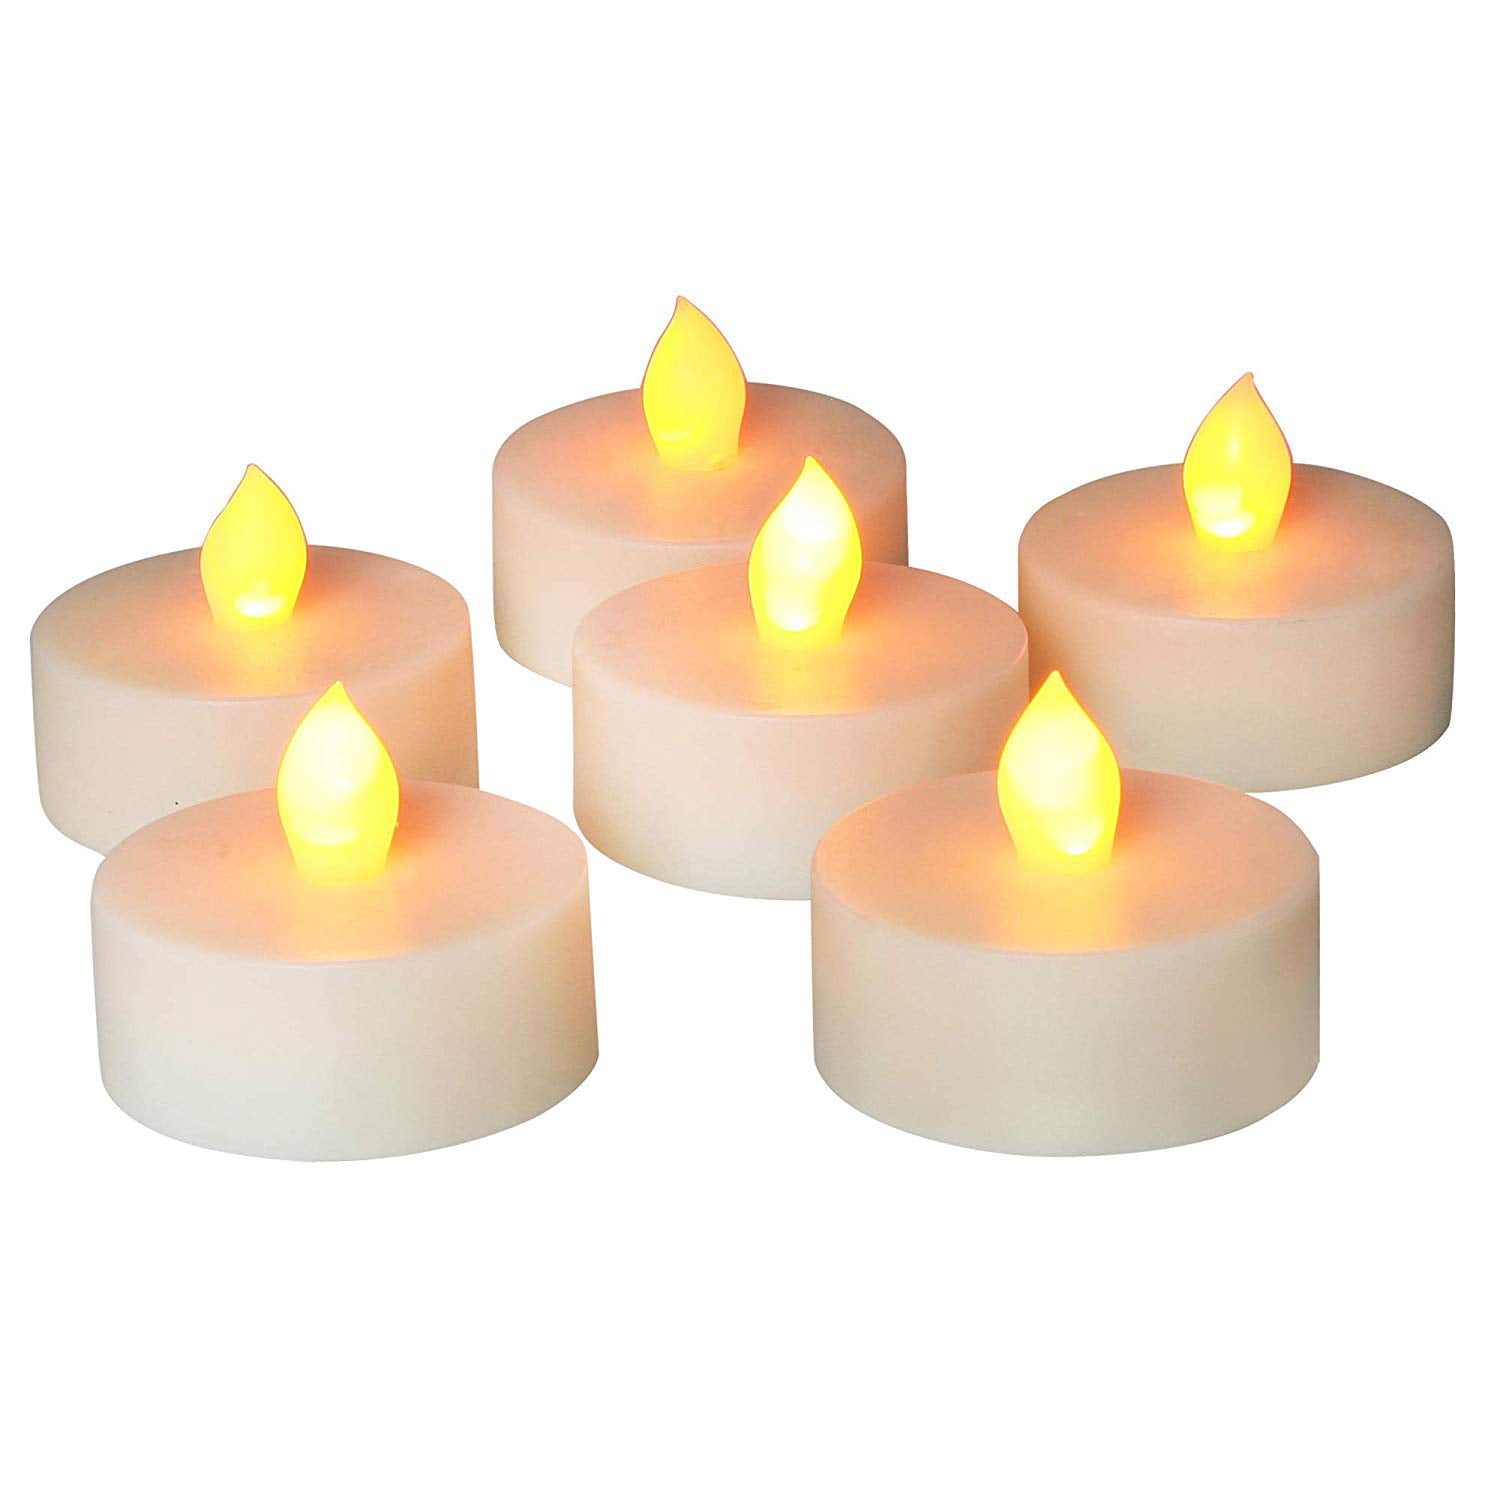 12 Flameless Votive Decor Candles LED Tea Light Battery Operated Flickering Lamp 